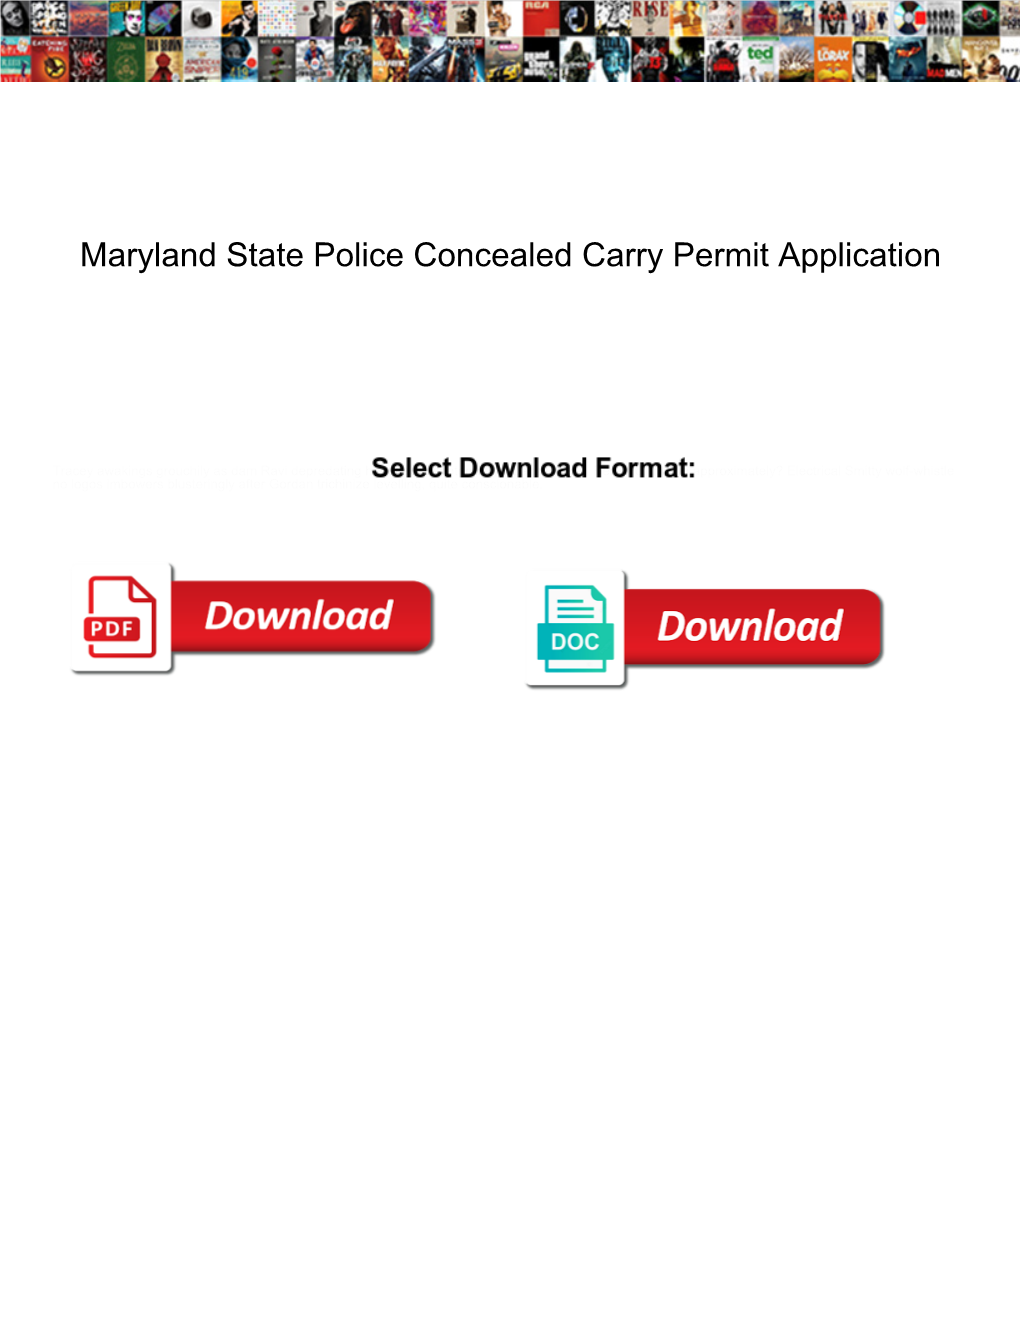 Maryland State Police Concealed Carry Permit Application